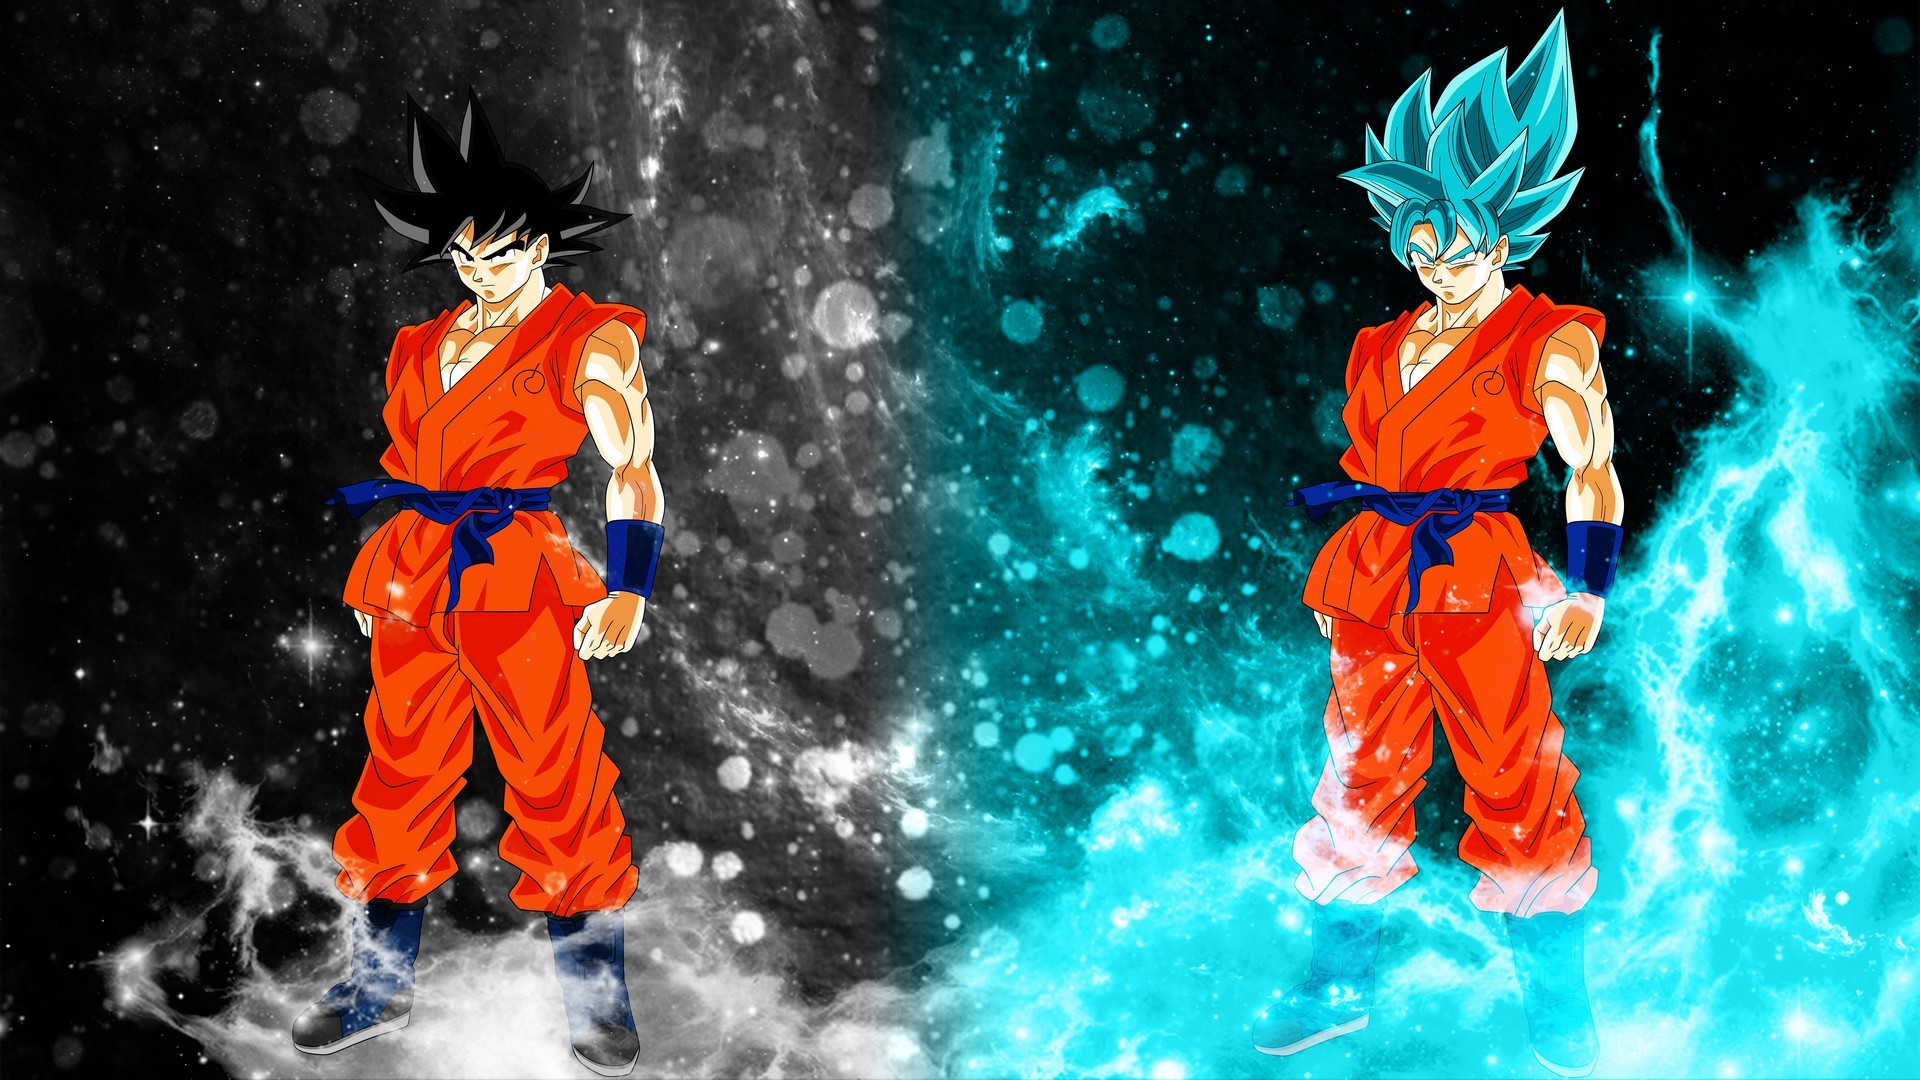 Goku SSJ Blue Wallpaper with image resolution 1920x1080 pixel. You can use this wallpaper as background for your desktop Computer Screensavers, Android or iPhone smartphones